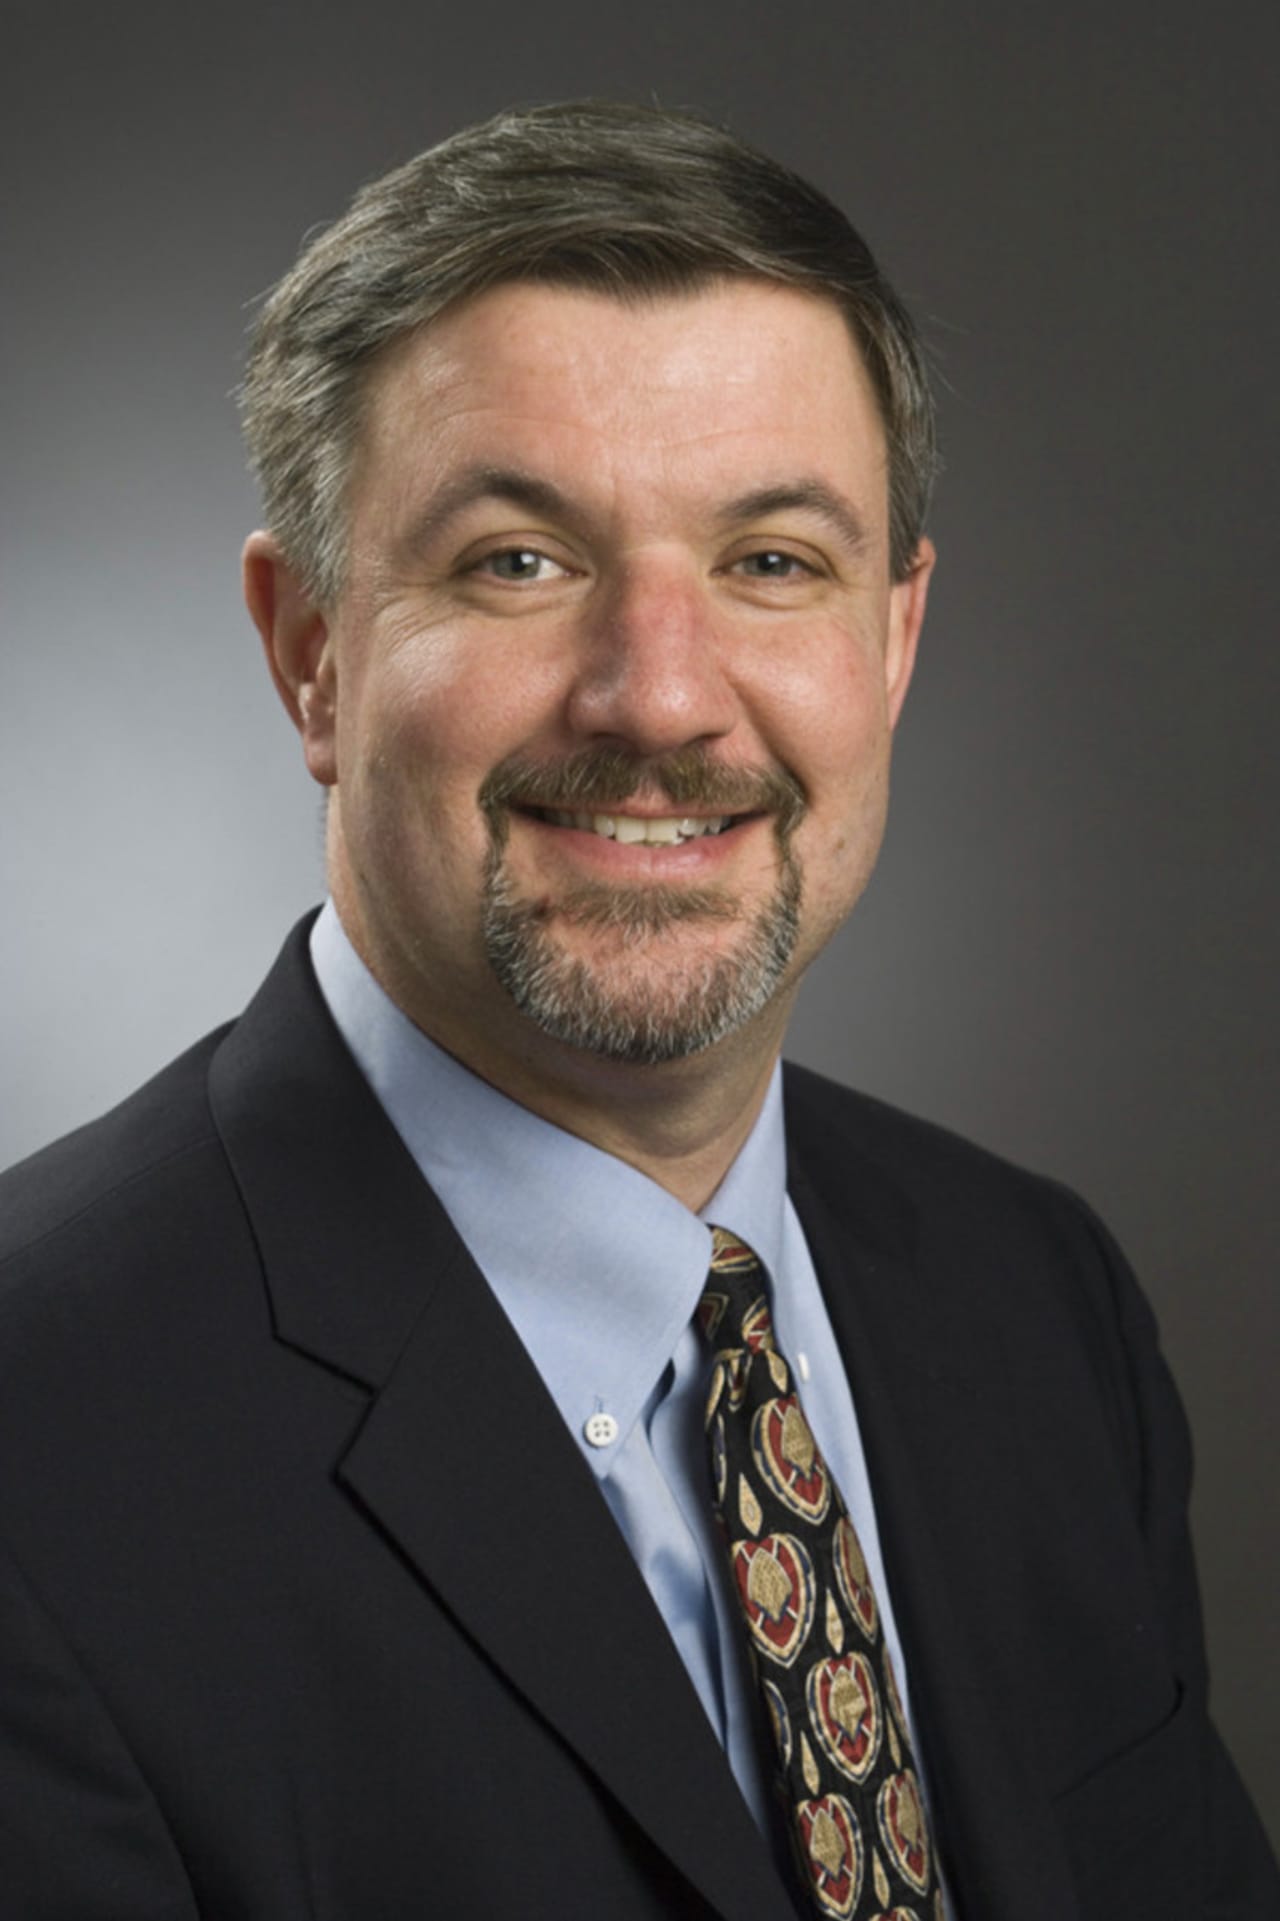 William Piper is the chief executive officer of the Waveny LifeCare Network.